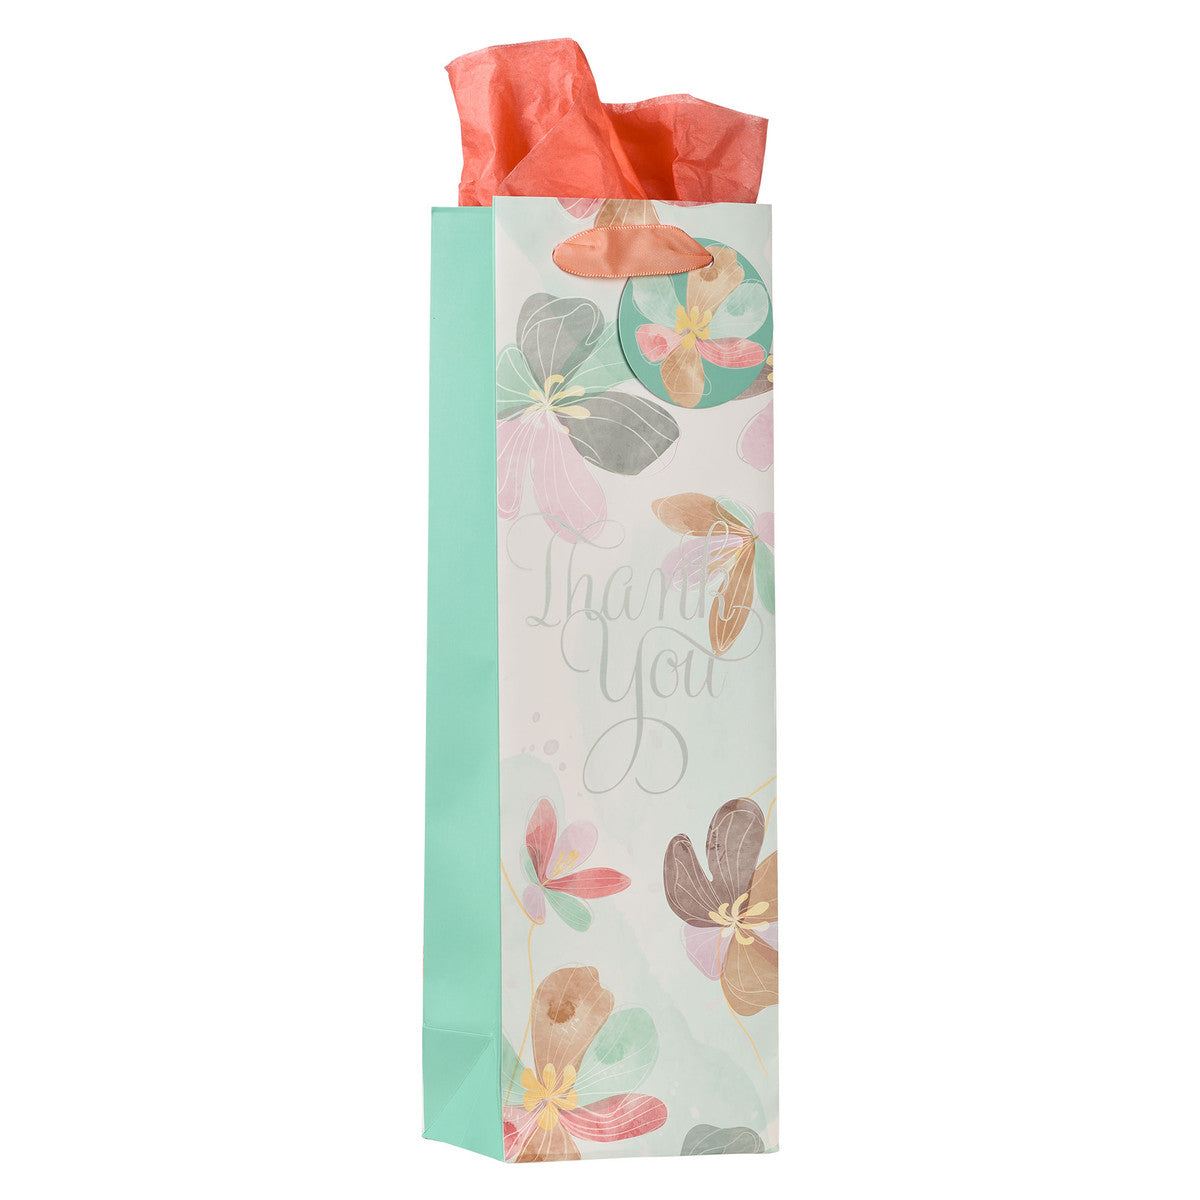 Thank You Teal Floral Bottle Gift Bag - The Christian Gift Company